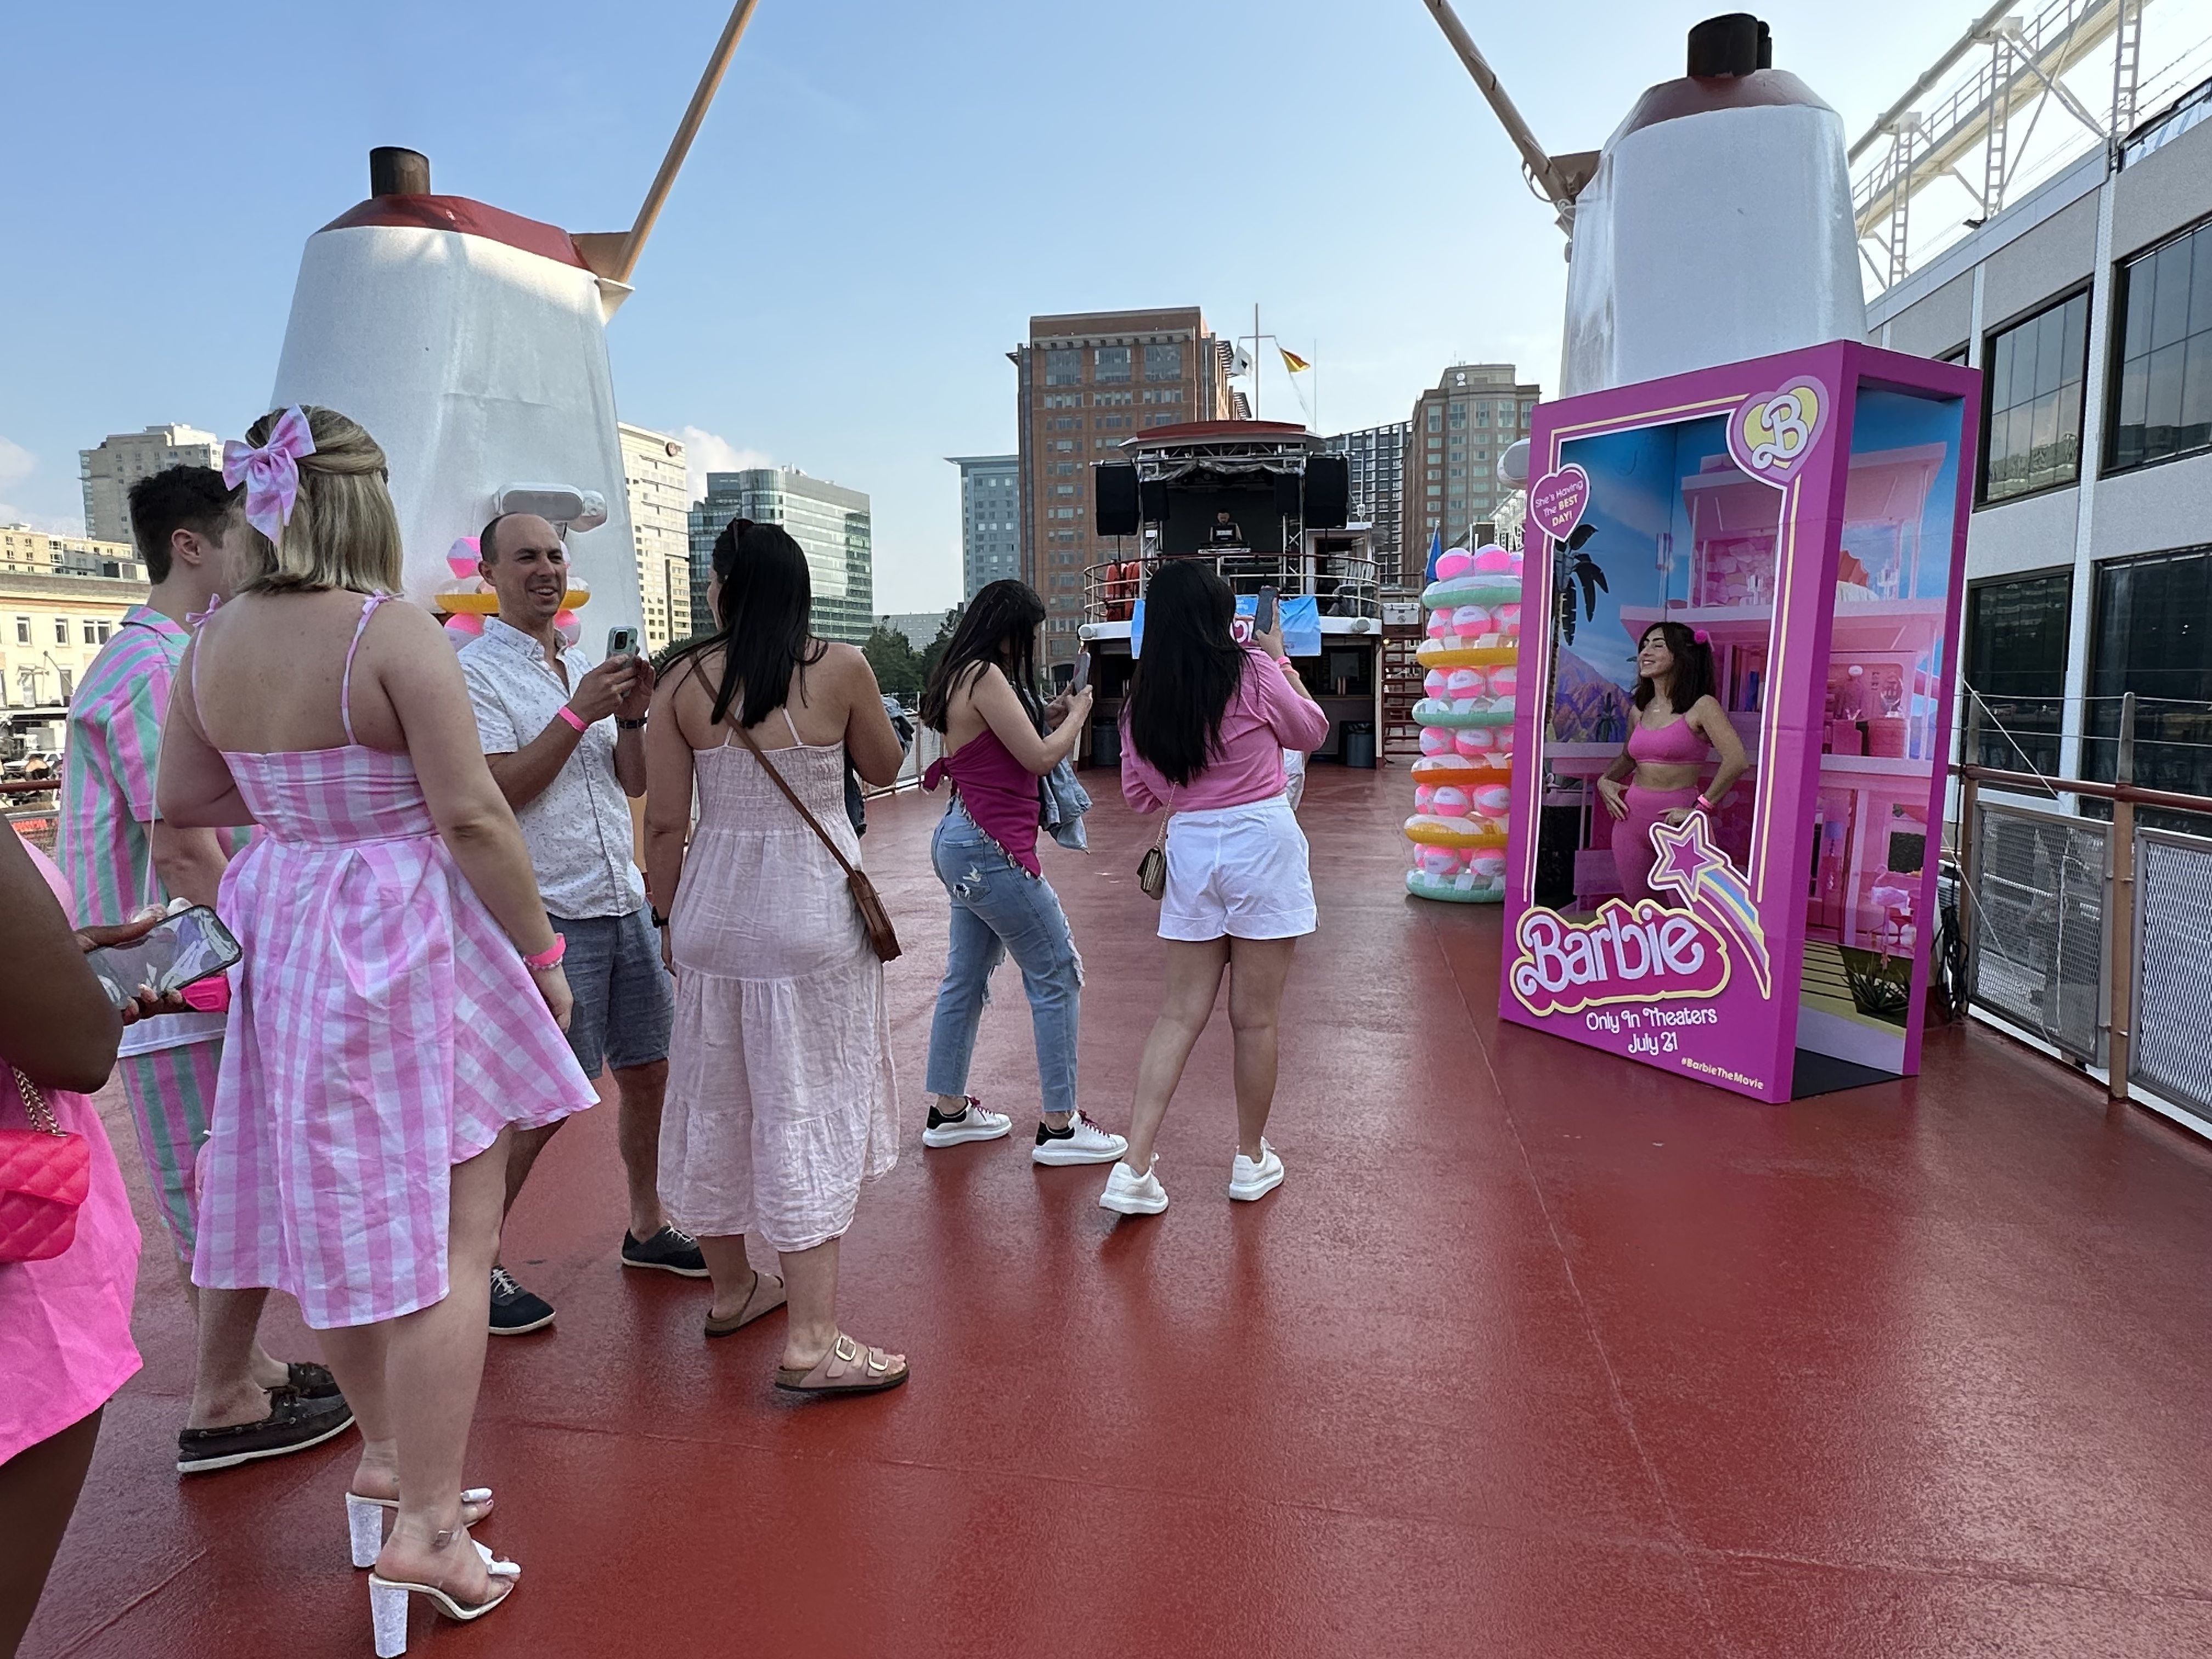 A small line forms on the top of the boat as people take photos in a life-size Barbie doll box.